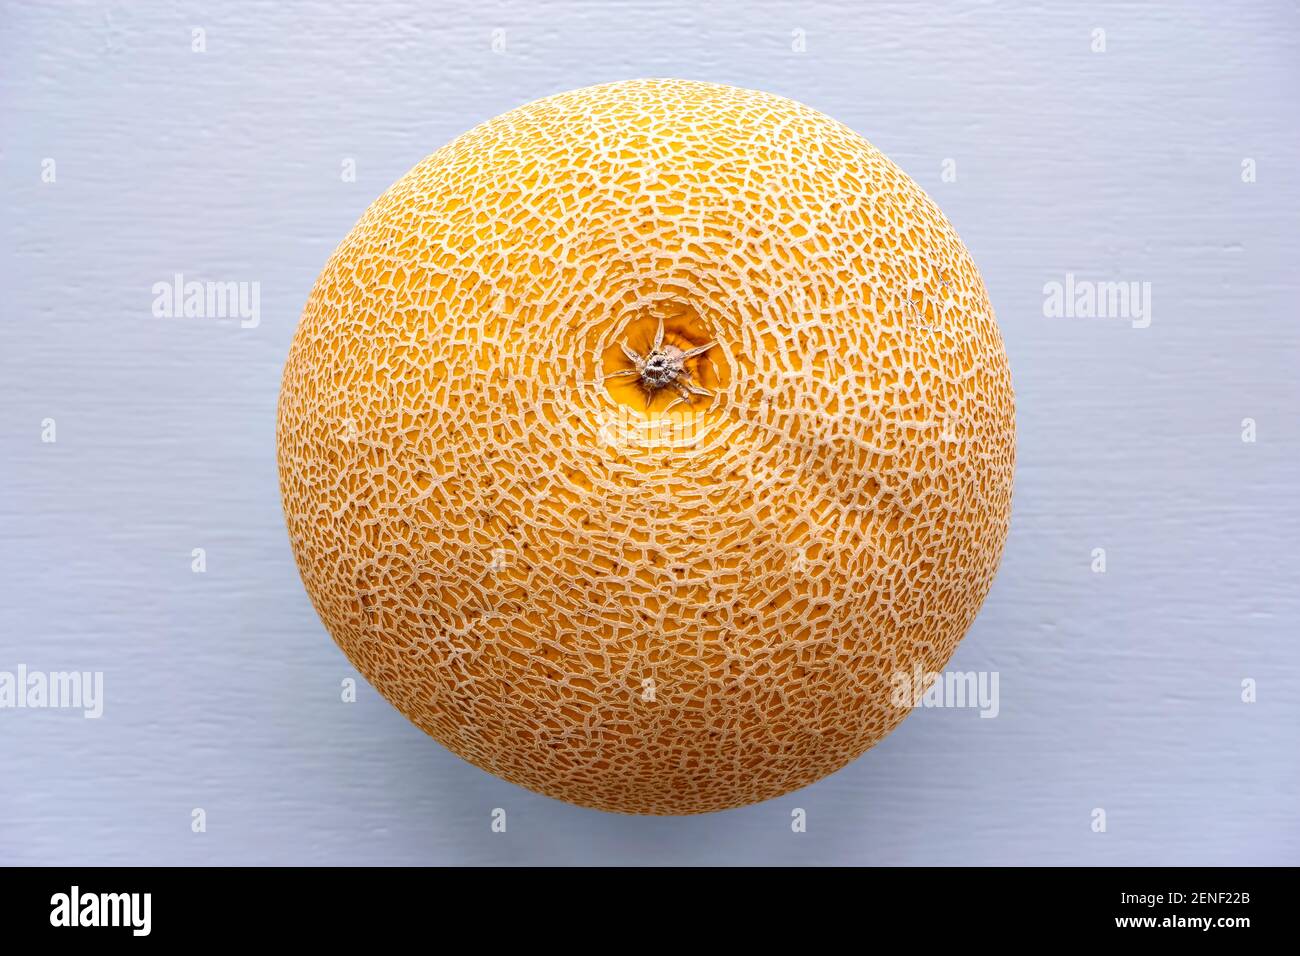 Top view image of honeydew melon with skin texture on a light background. Honeydew melon is the fruit of one cultivar group of the muskmelon. Stock Photo